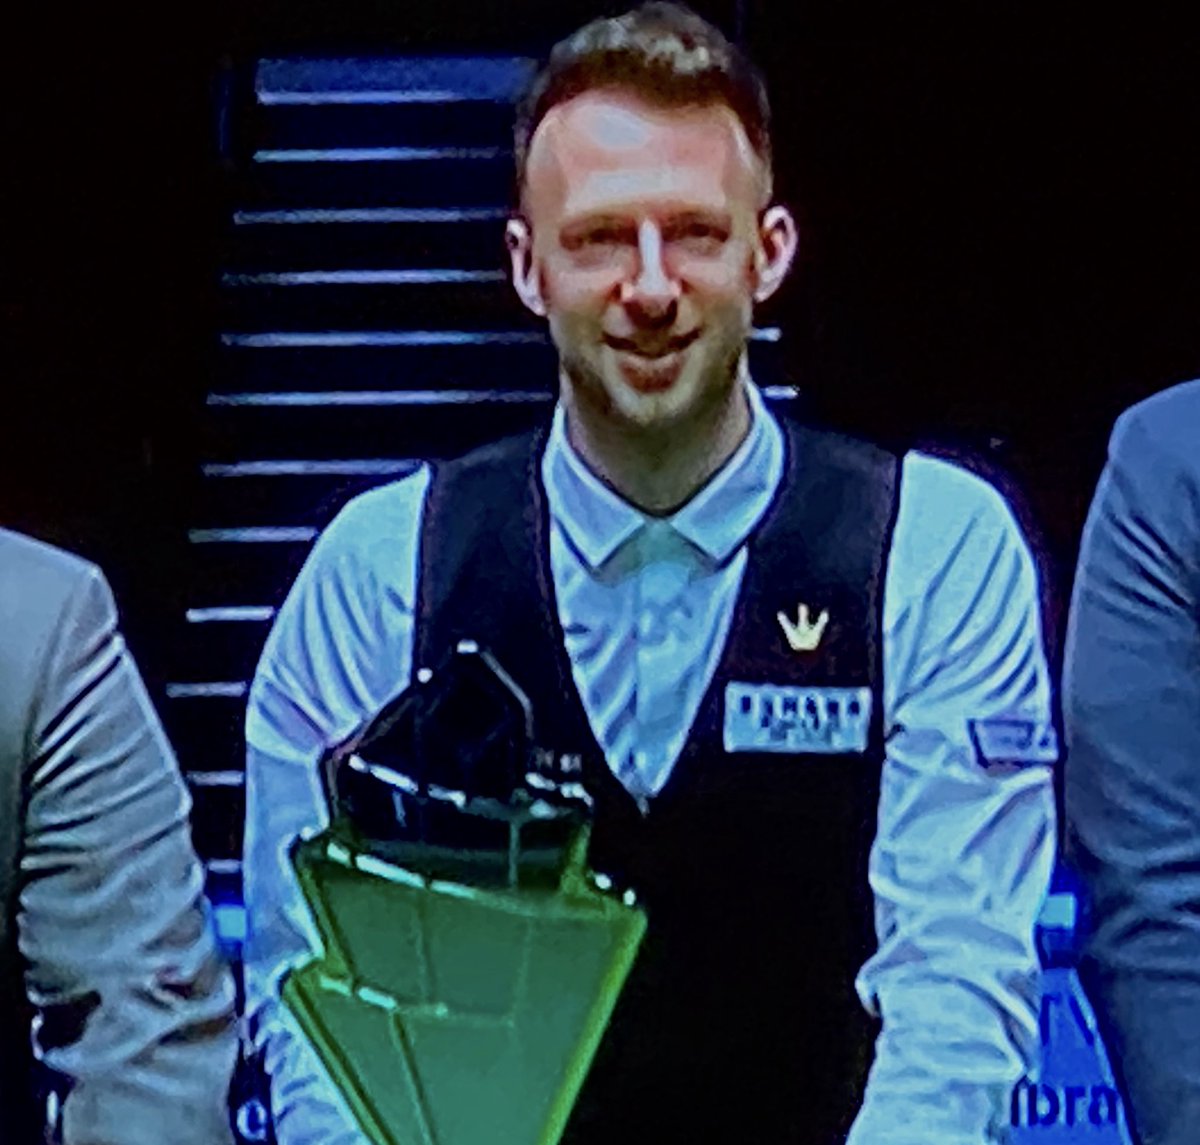 #GibraltarOpen Champion #Betvictor series Champion ⁦@judd147t⁩ 💰💰💰and a record 6th ranking event winner this season